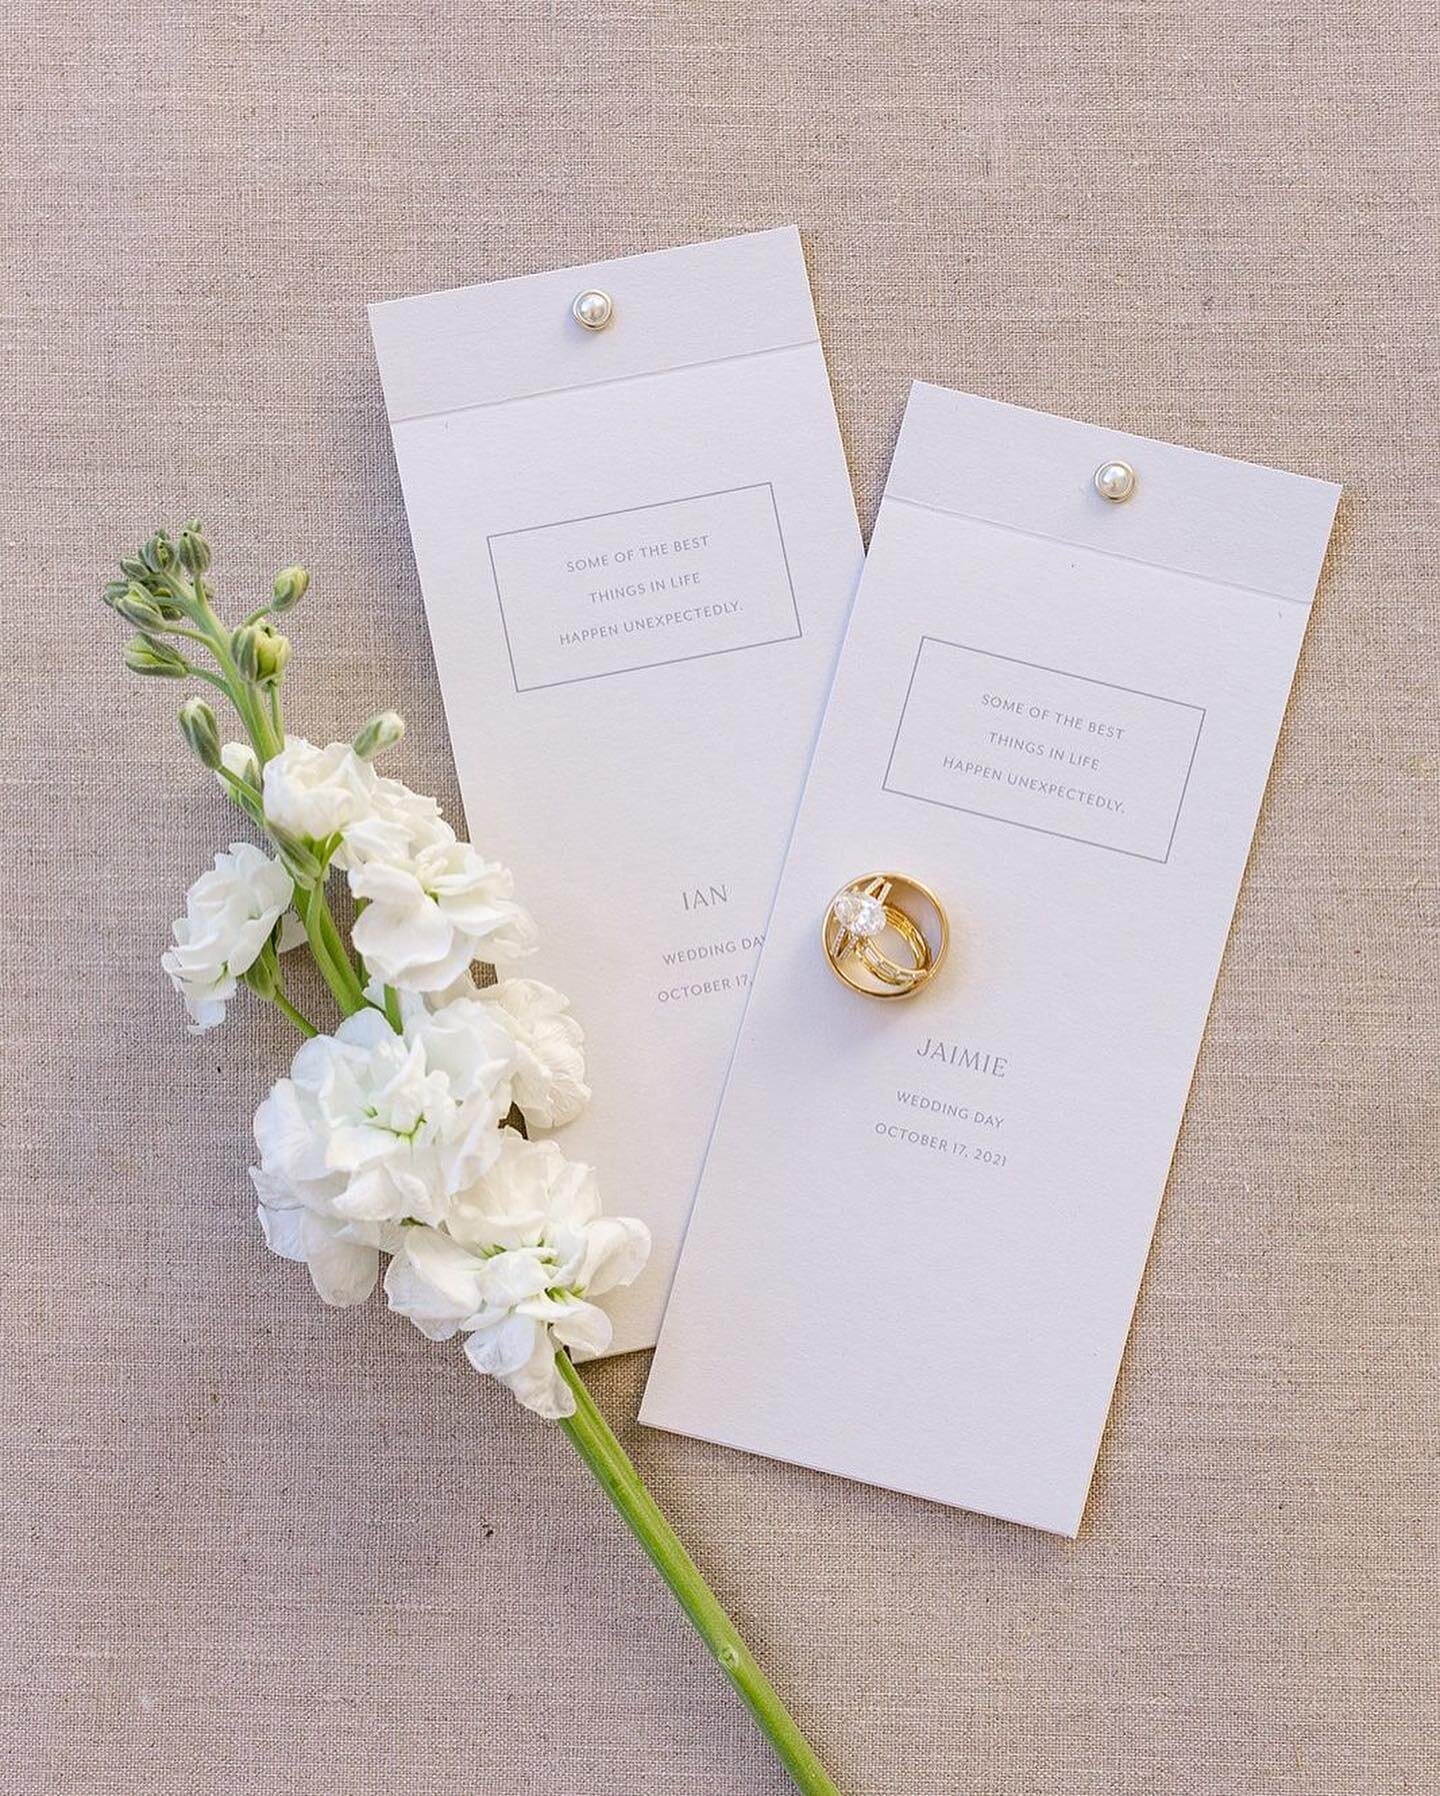 We designed slender menus with a seating card on top, personalized with each guests name. Little pearl brads were used to keep the name card and menu together. 

Event Coordinator- @unoaked.events
Venue- @fivecrownsrestaurant
Photographer- @rachelste